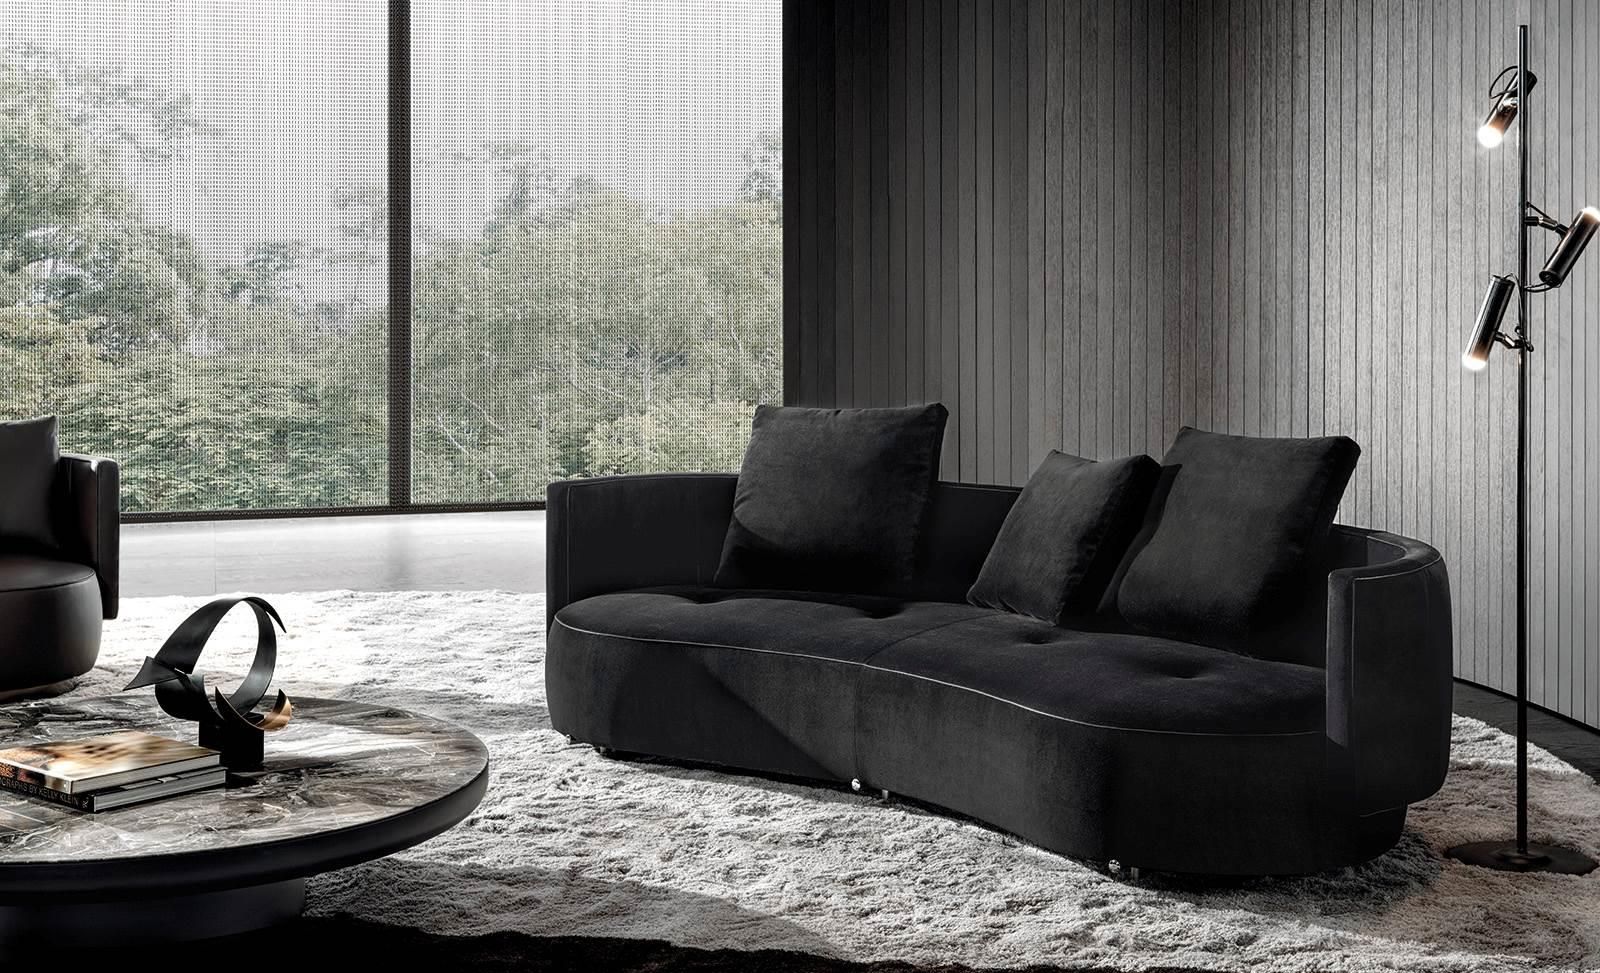 Torii Bold Seating Collection by Nendo for Minotti